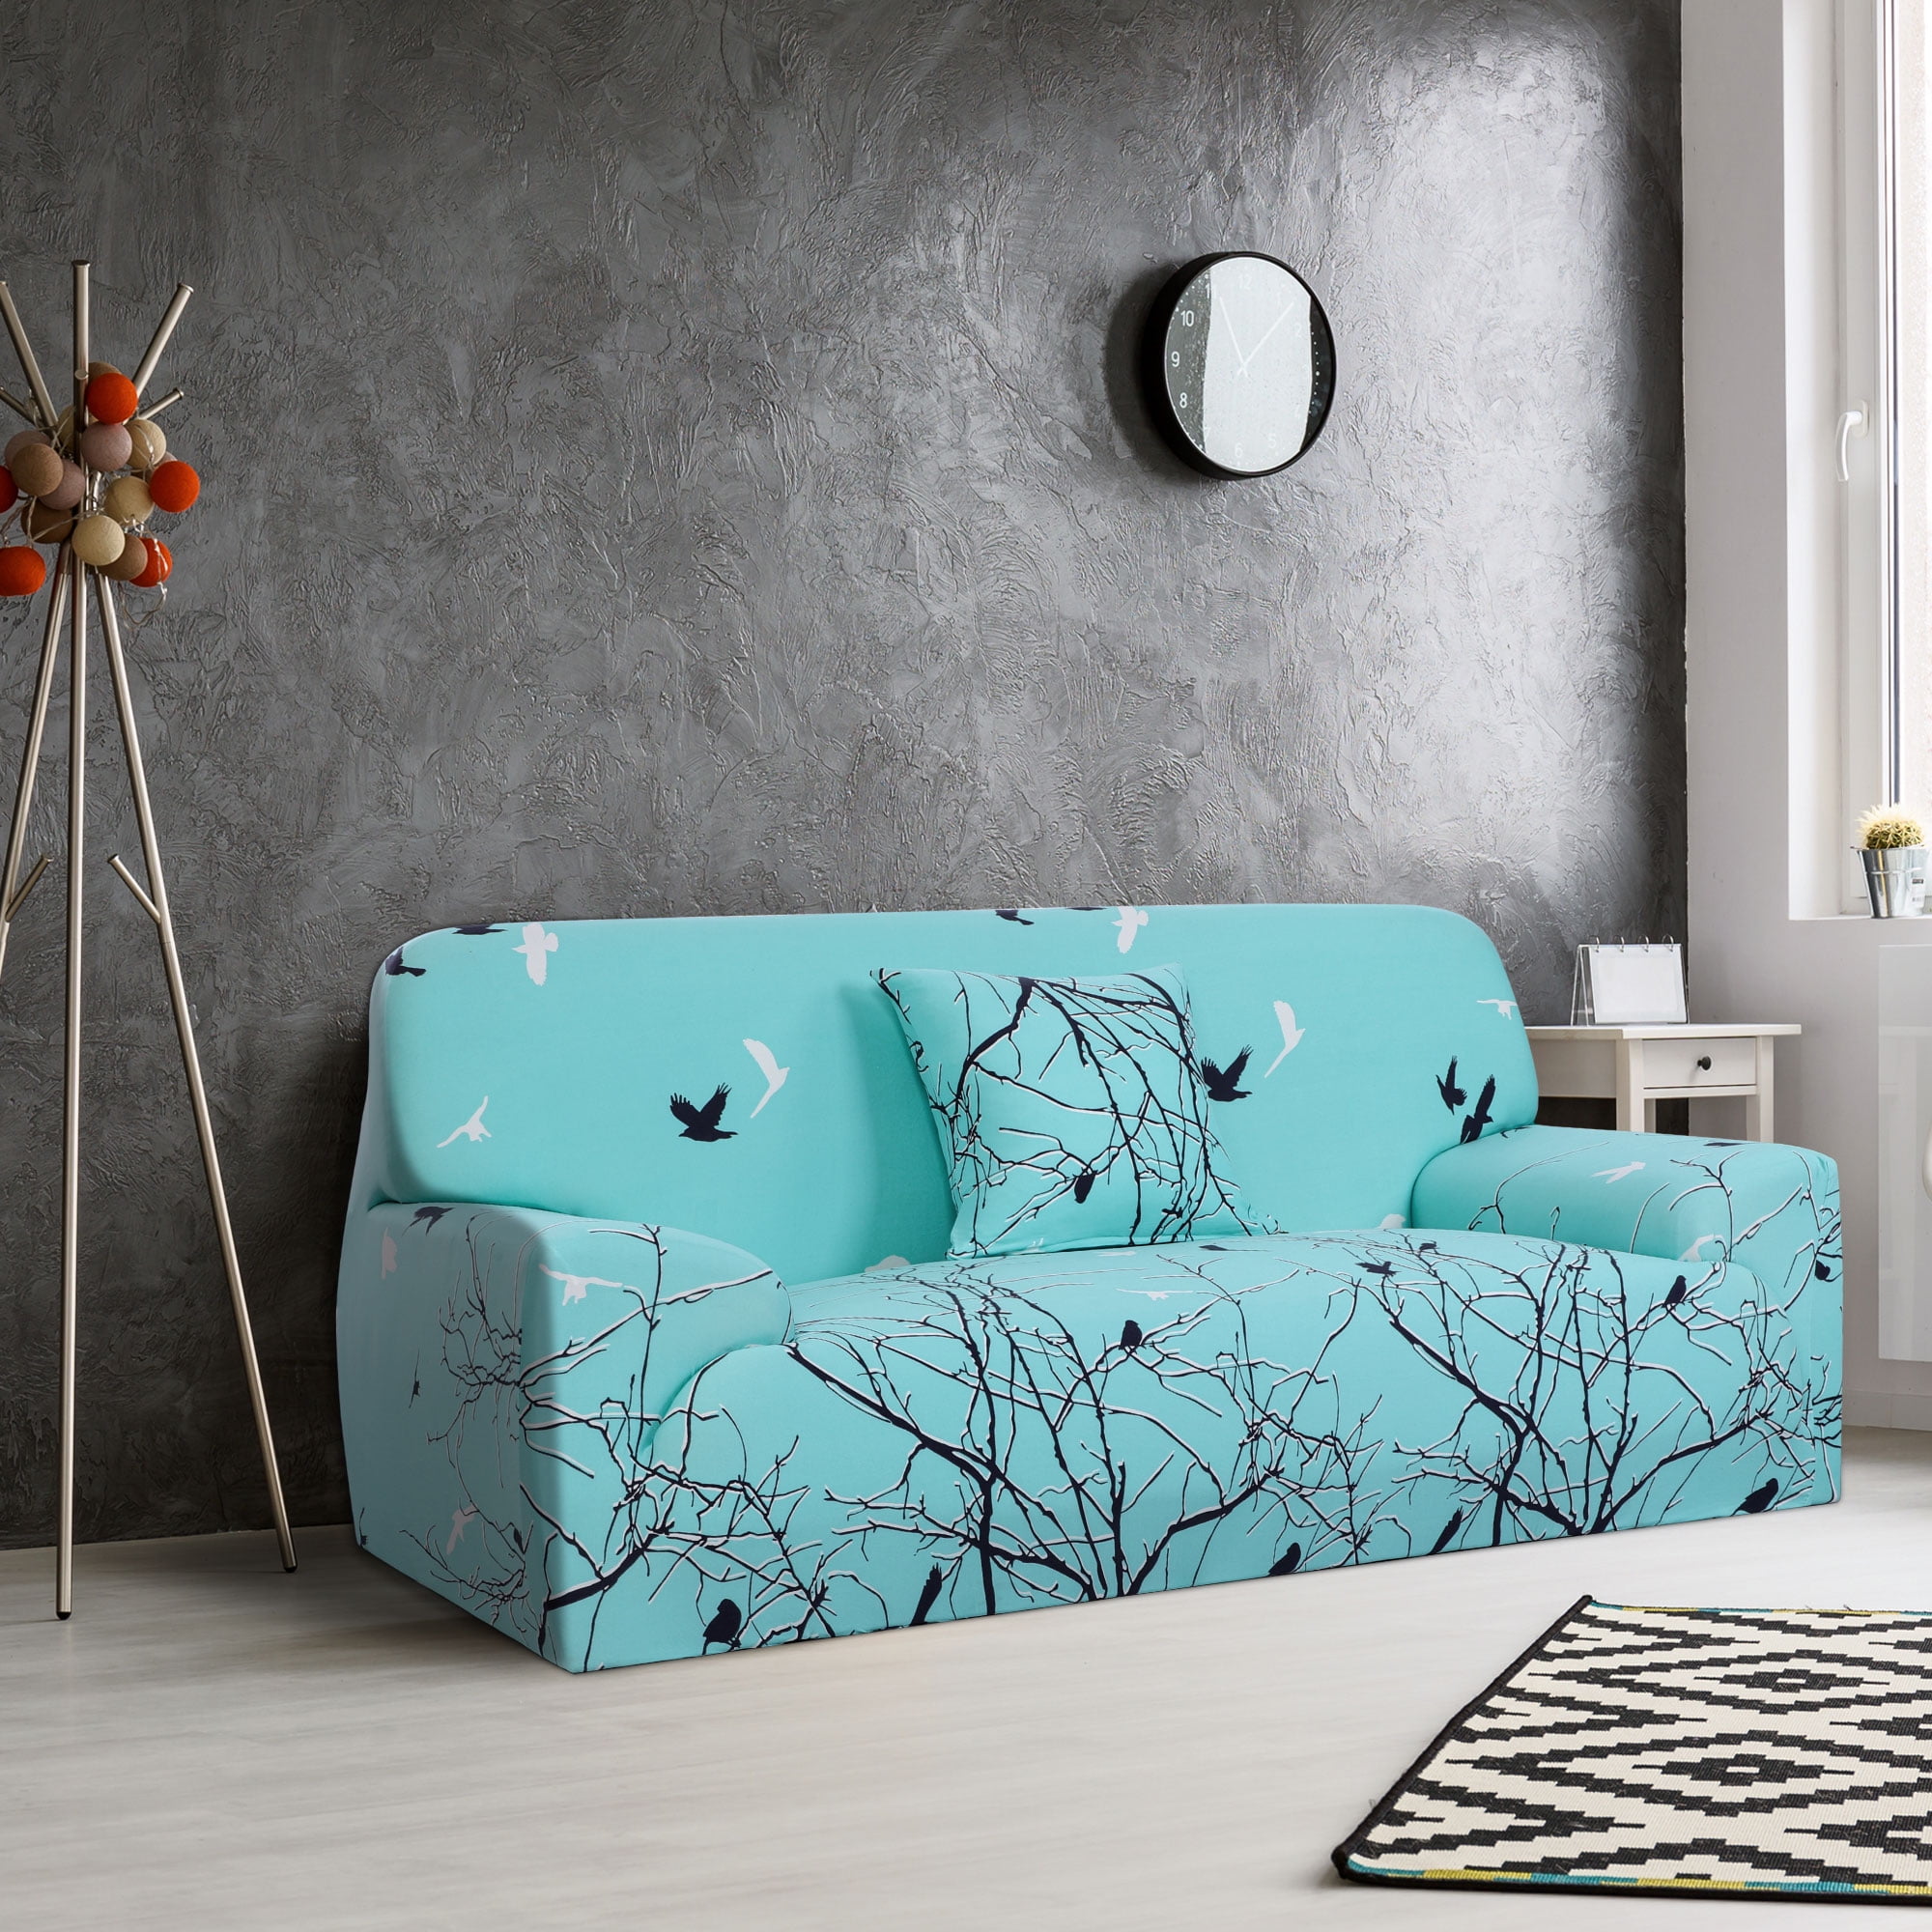 HEYOMART Sofa Cover High Stretch Elastic Fabric 1 2 3 Seater Sofa Slipcover Chair Loveseat Couch Cover Polyester Spandex Furniture Protector Cover 1 Seater, Pattern #Butterfly